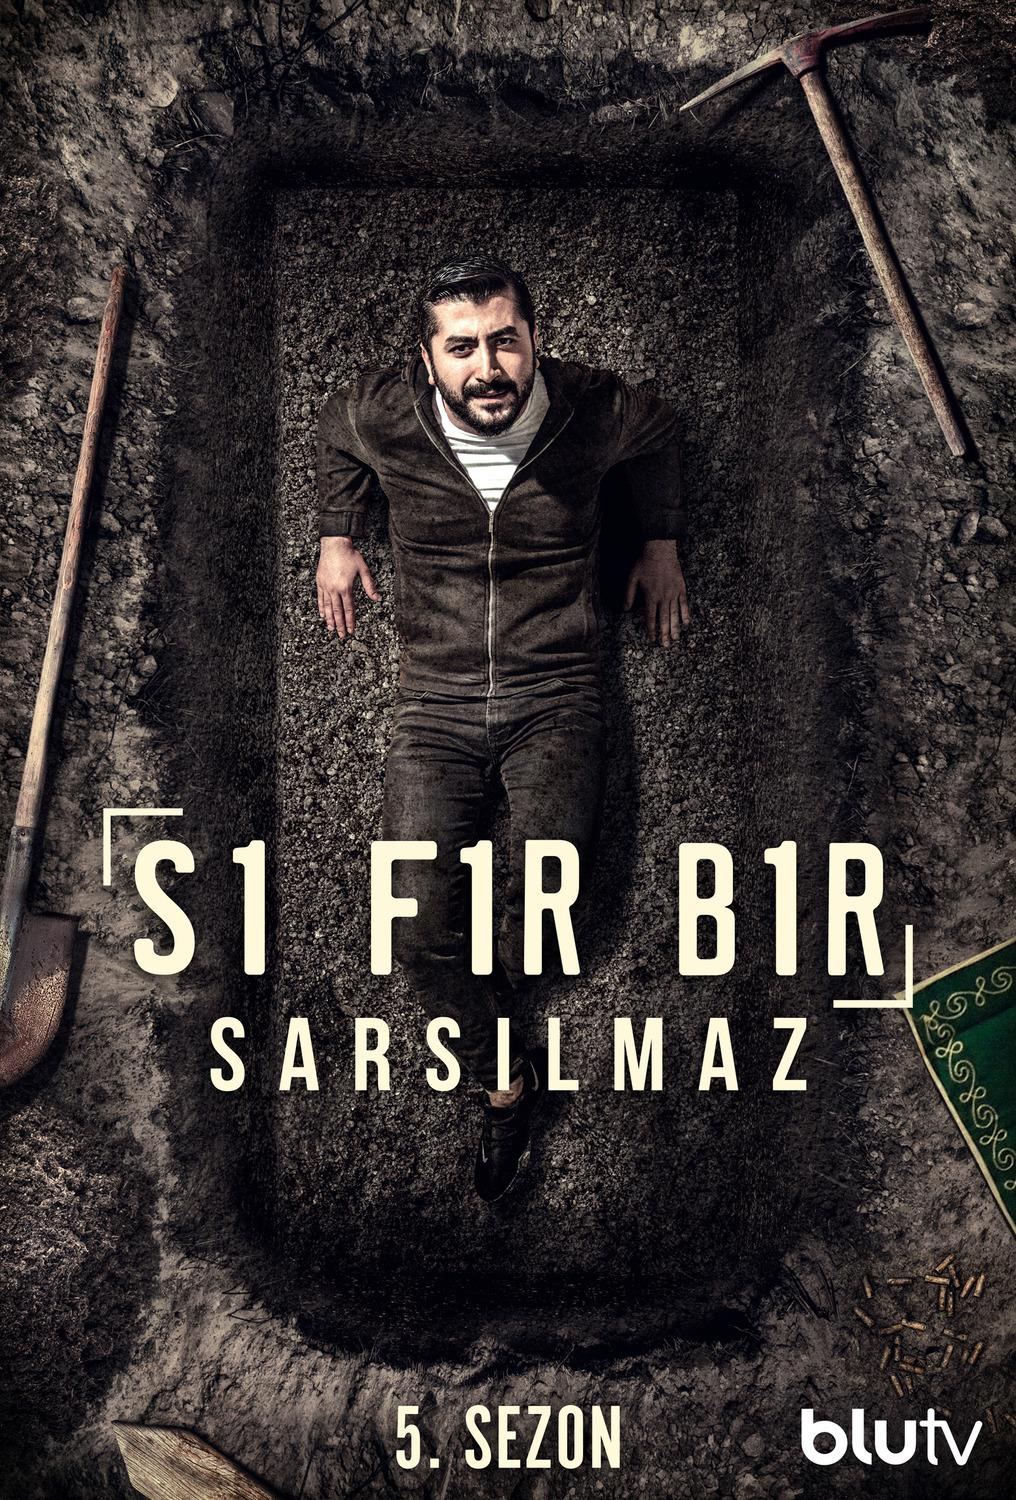 Extra Large TV Poster Image for Sifir Bir (#19 of 23)